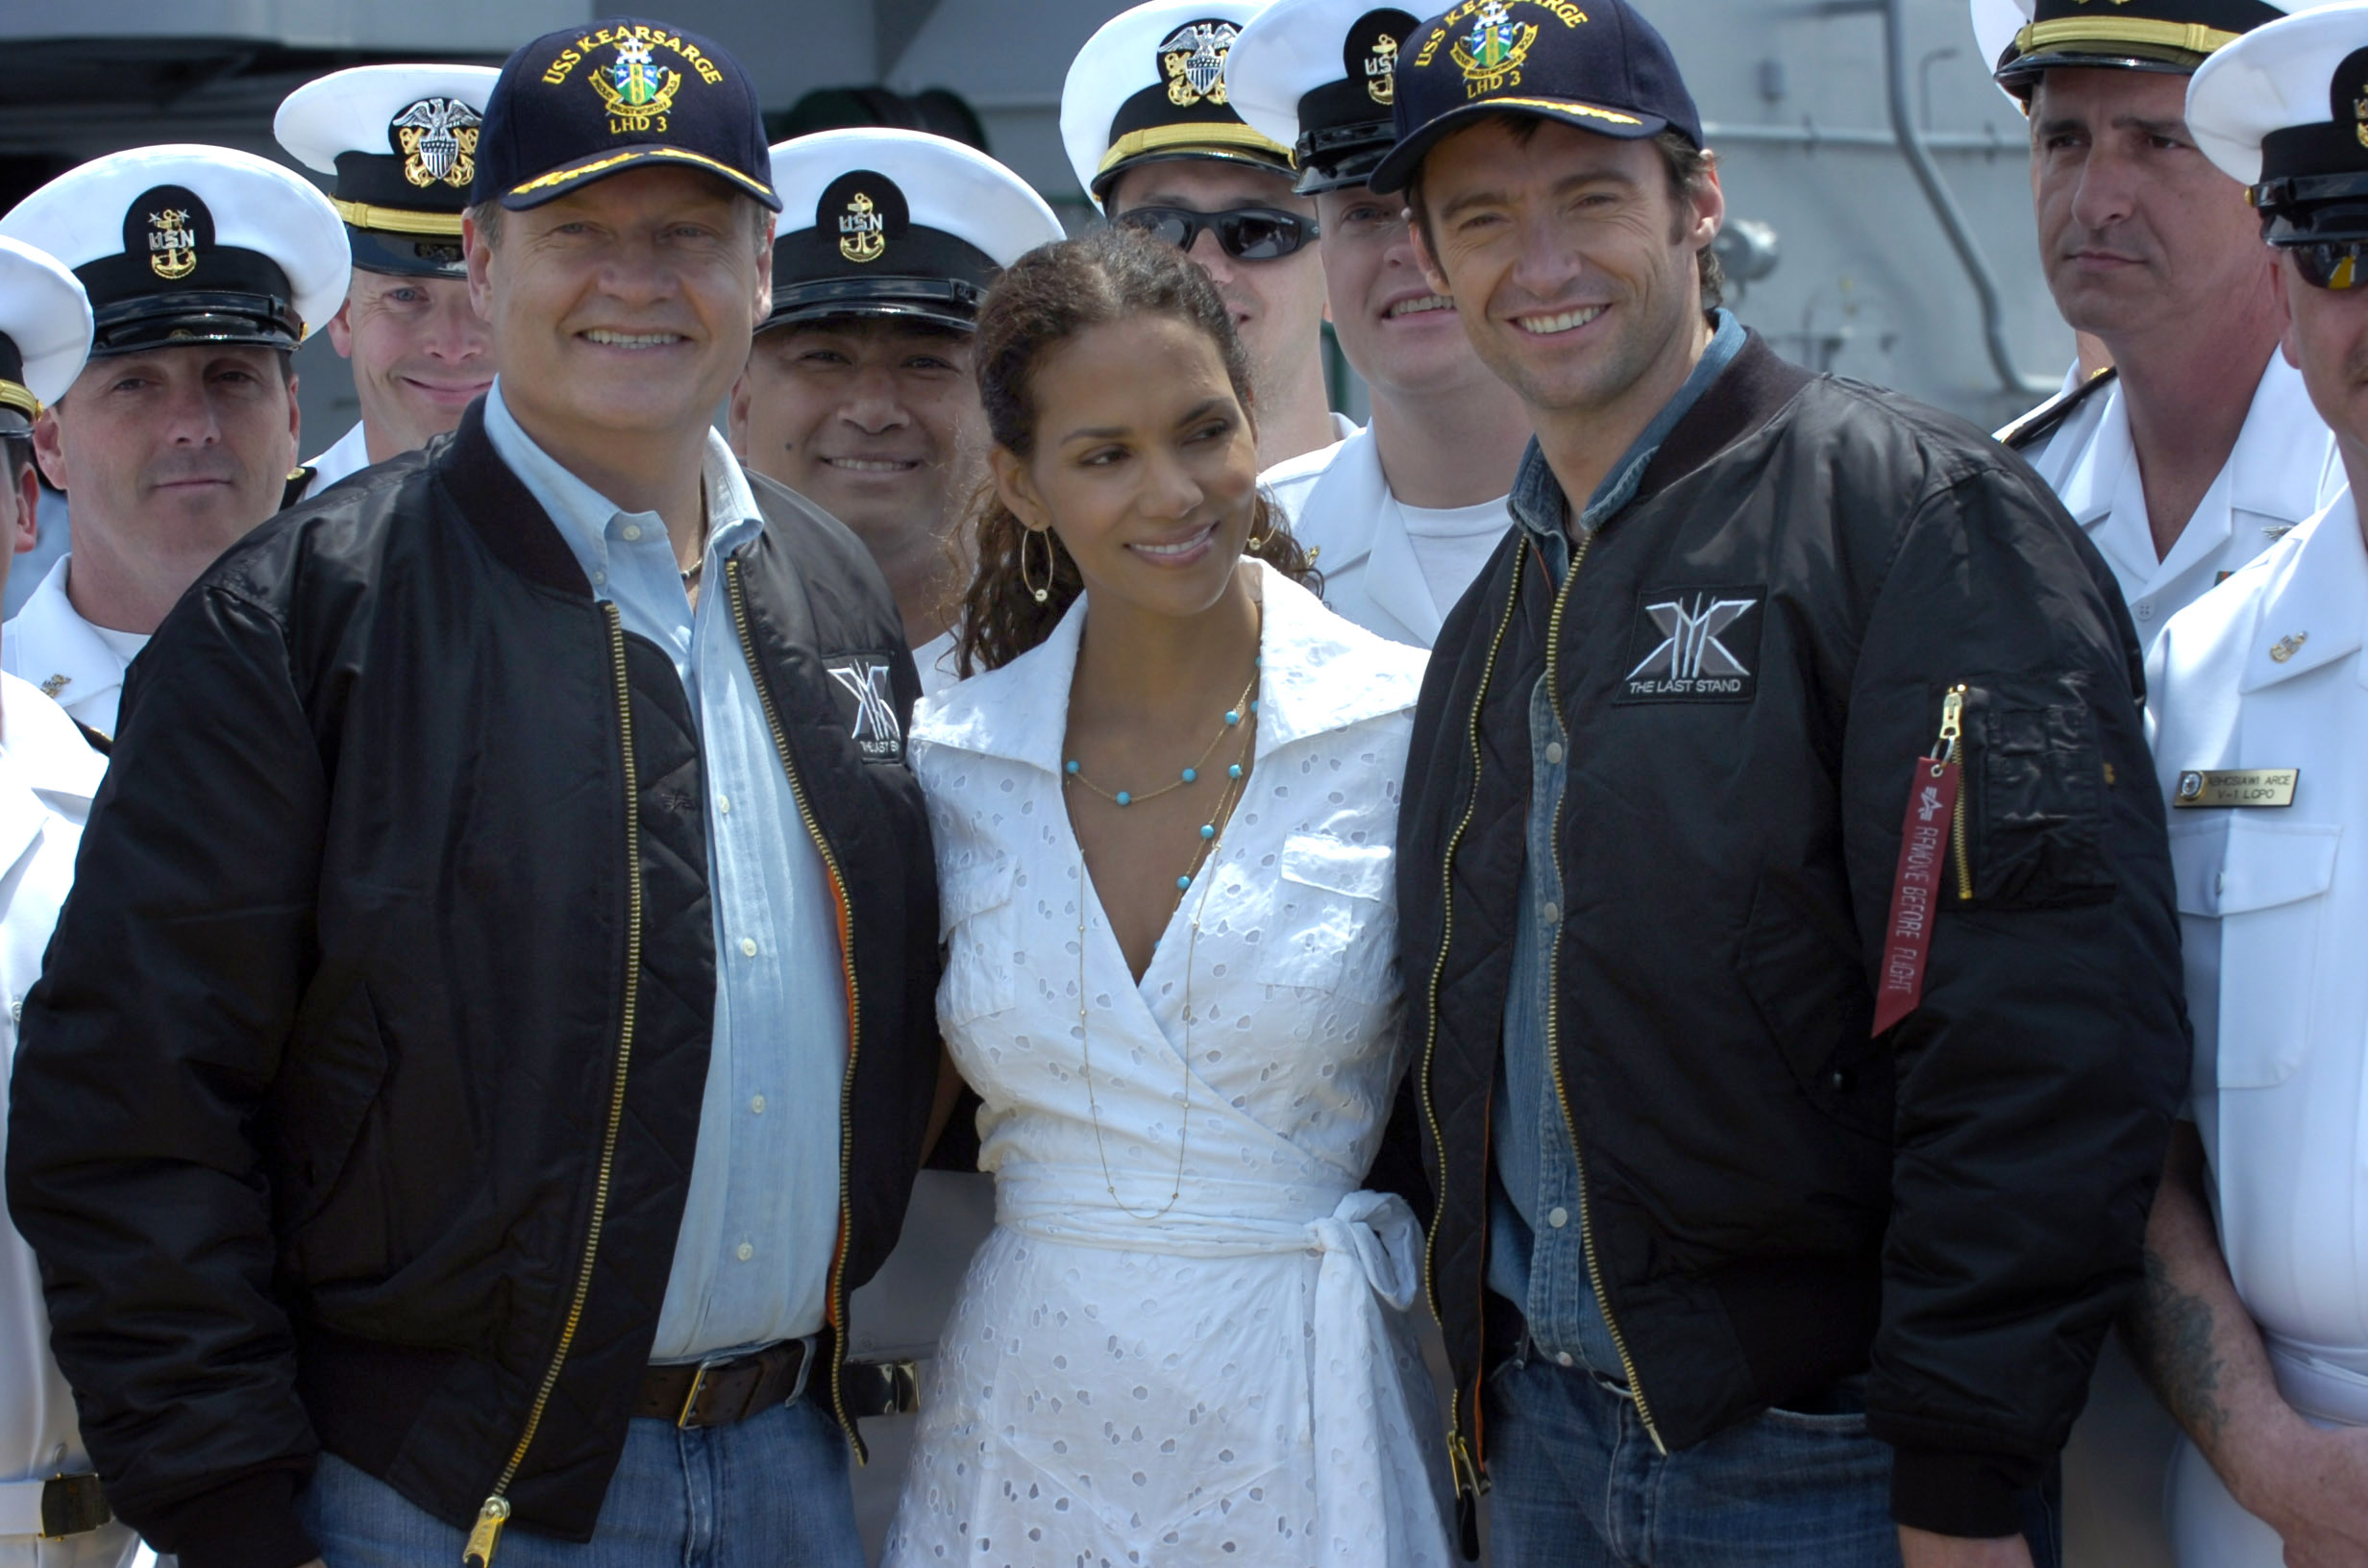 US_Navy_060524-N-7676W-279_Actors_Hugh_Jackman,_right,_AKA_Wolverine,_Ms._Halle_Berry,_center,_AKA_Storm,_and_Kelsey_Grammer,_left,_AKA_Dr._Henry_McCoy,_pose_for_pictures_with_crew_members.jpg